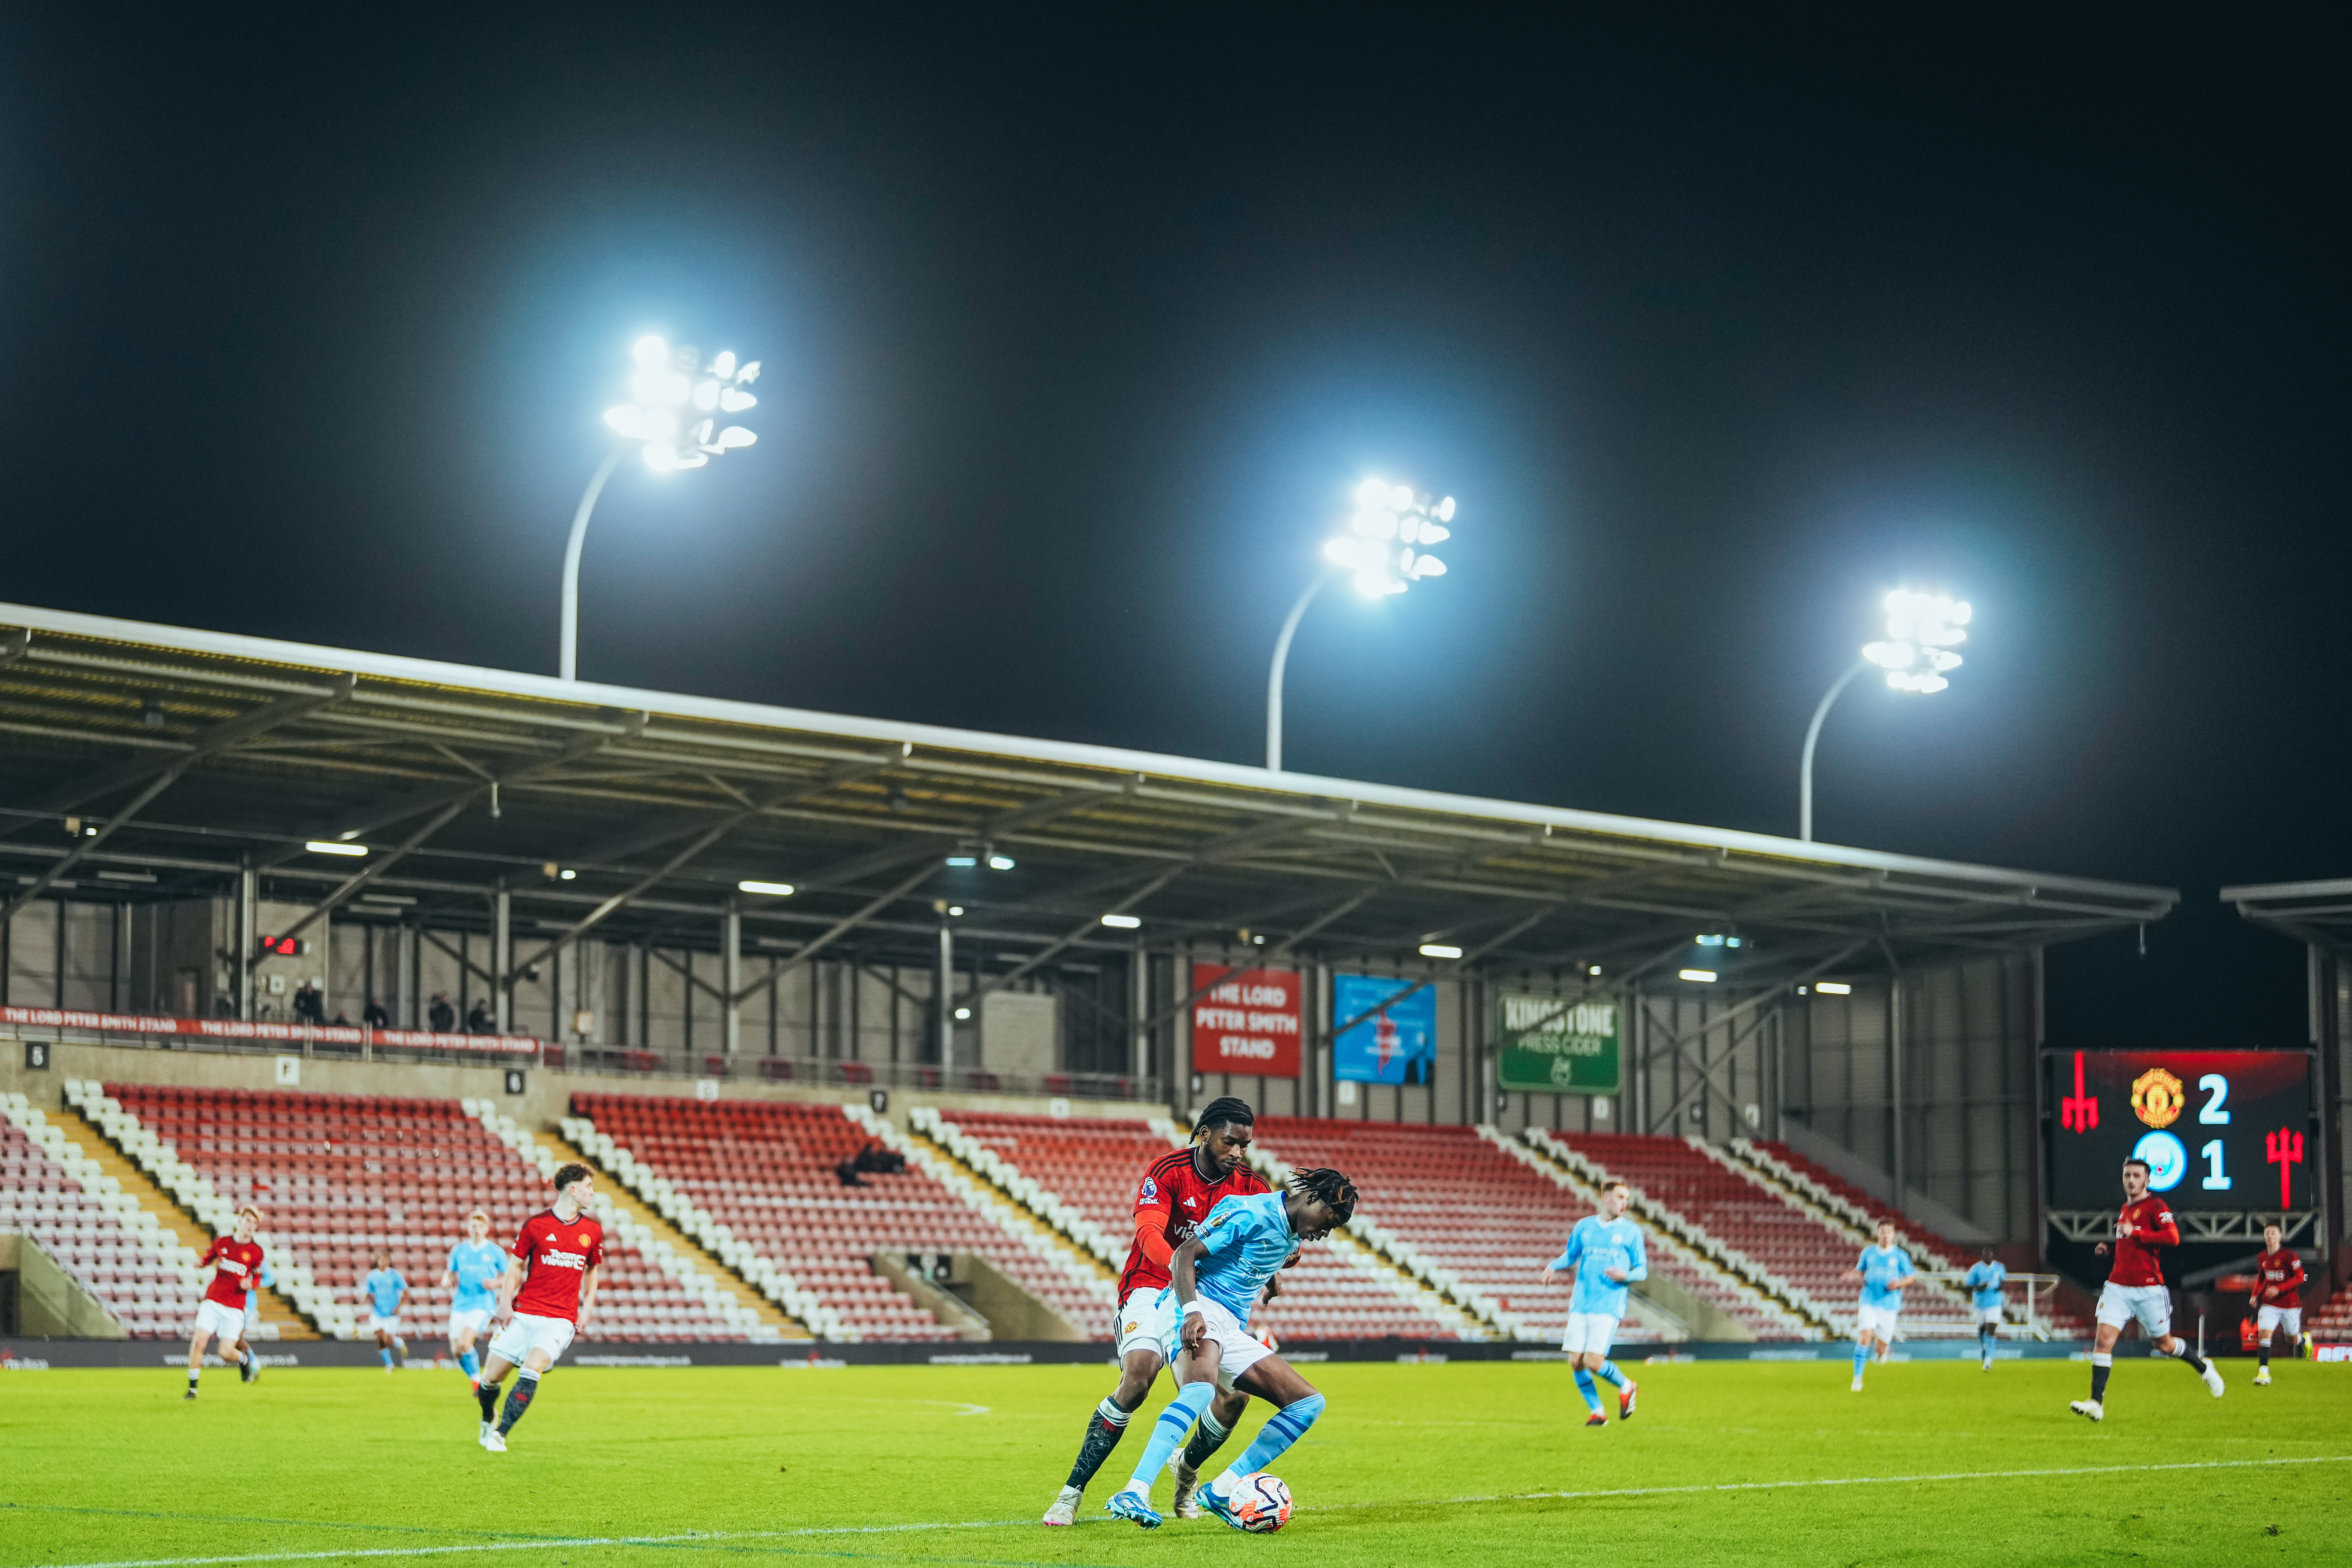 THE VENUE : Leigh Sports Village played host to a tight Manchester derby.